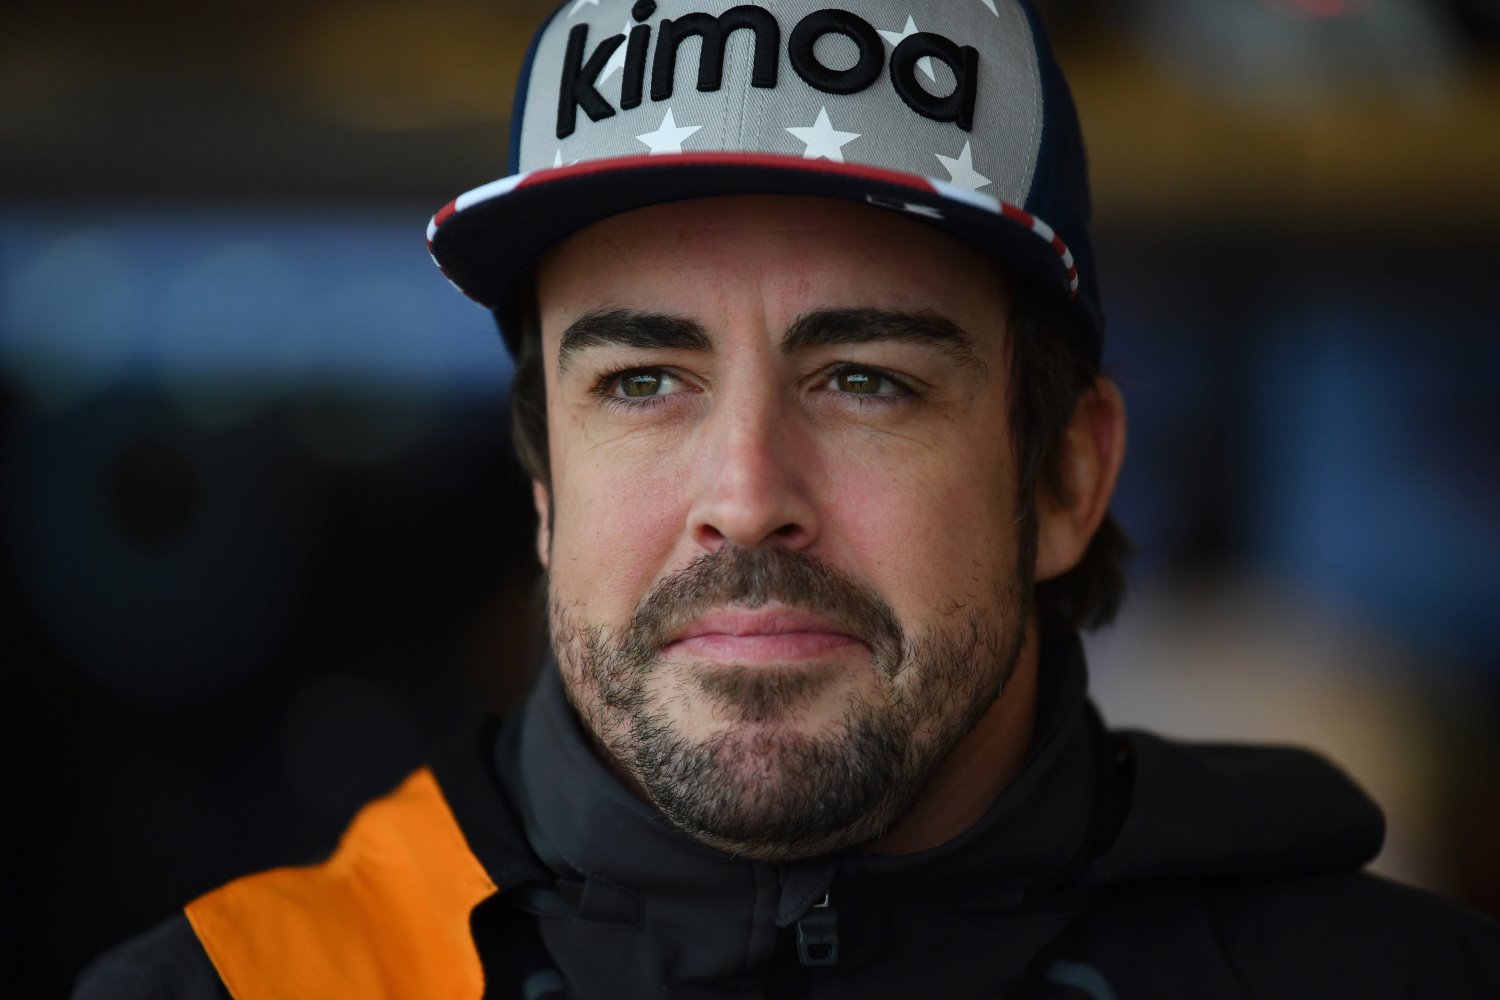 How much Kimoa can Alonso sell in America